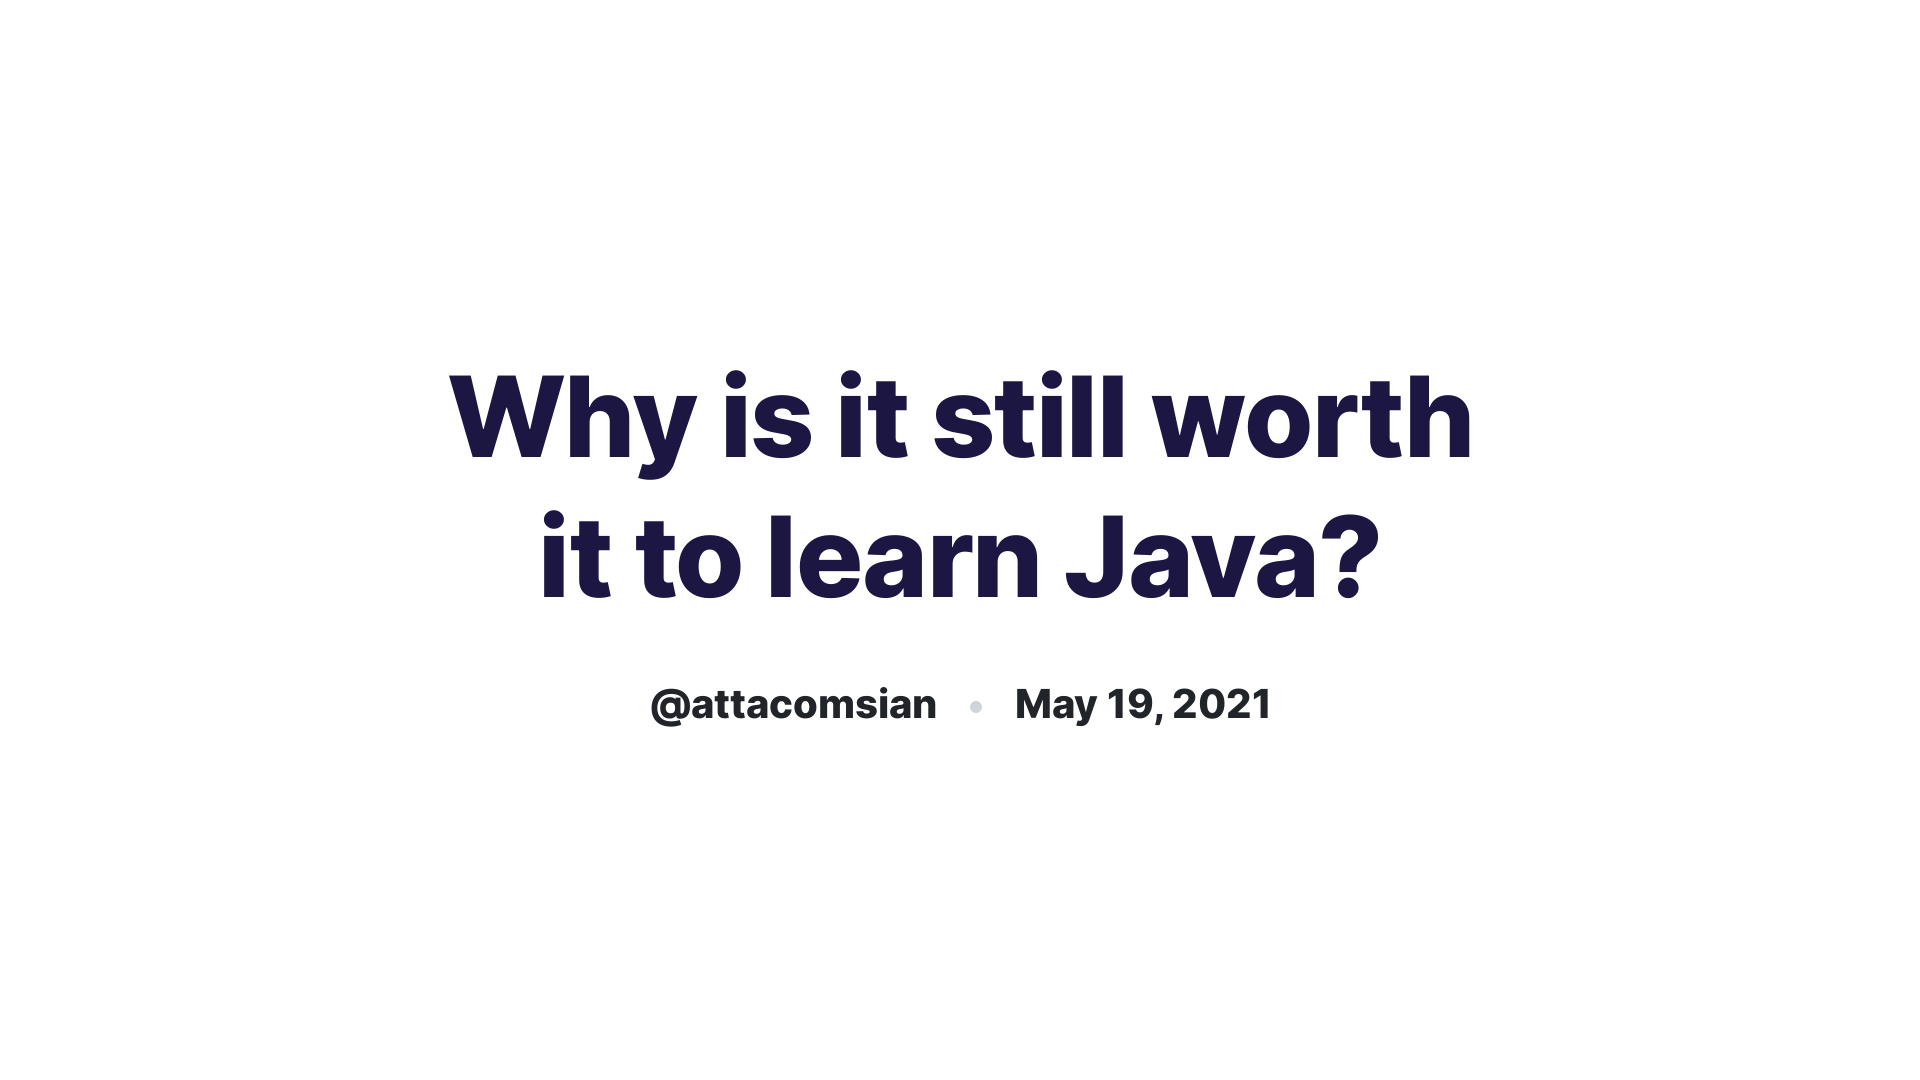 Why is it still worth it to learn Java?